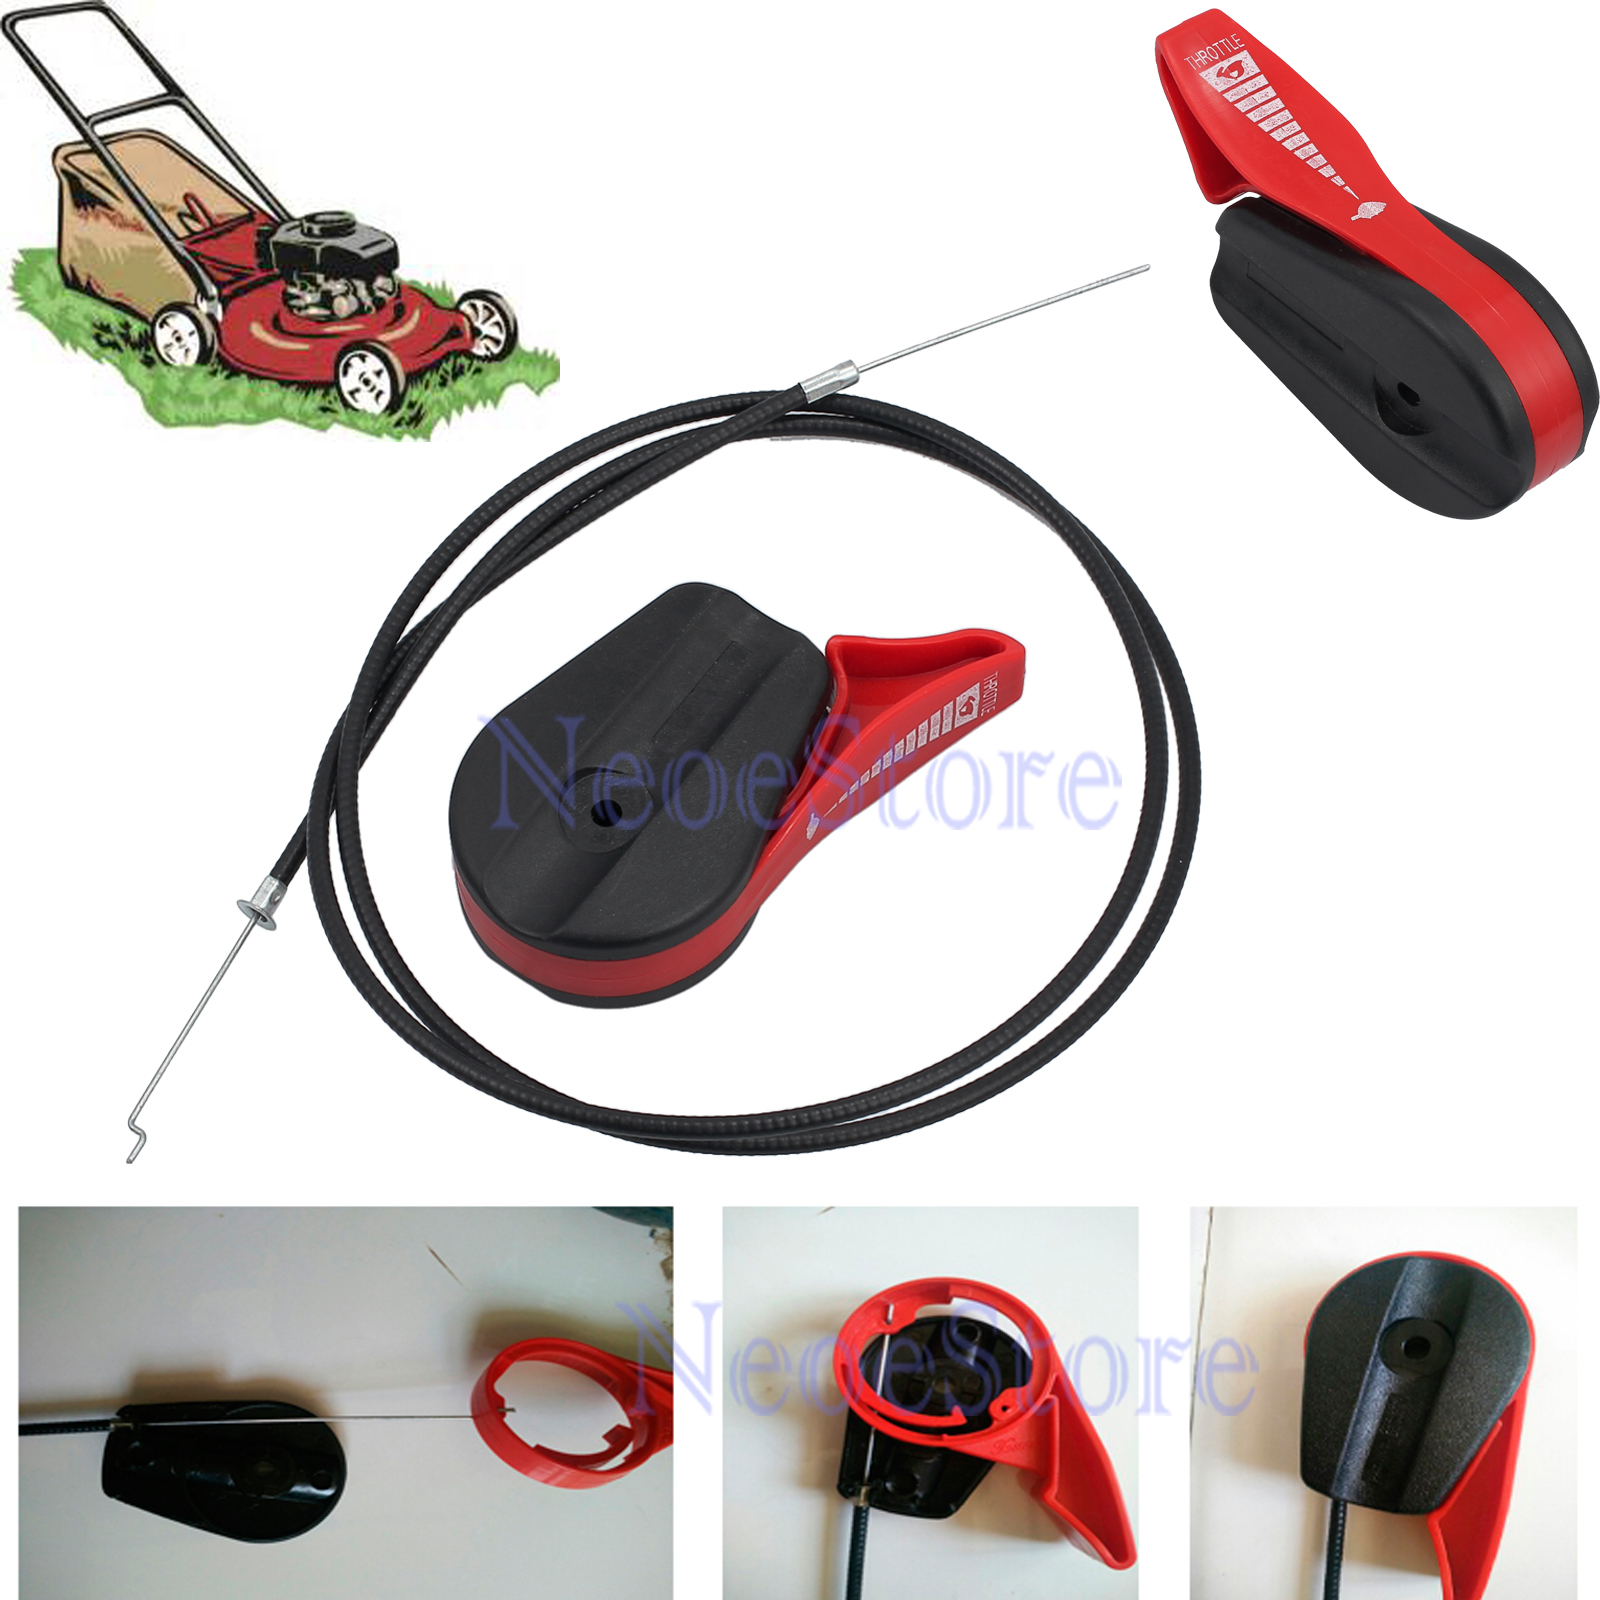 NEW UNIVERSAL THROTTLE CONTROL CABLE For MOST BRANDS OF MOWERS VICTA BRIGGS